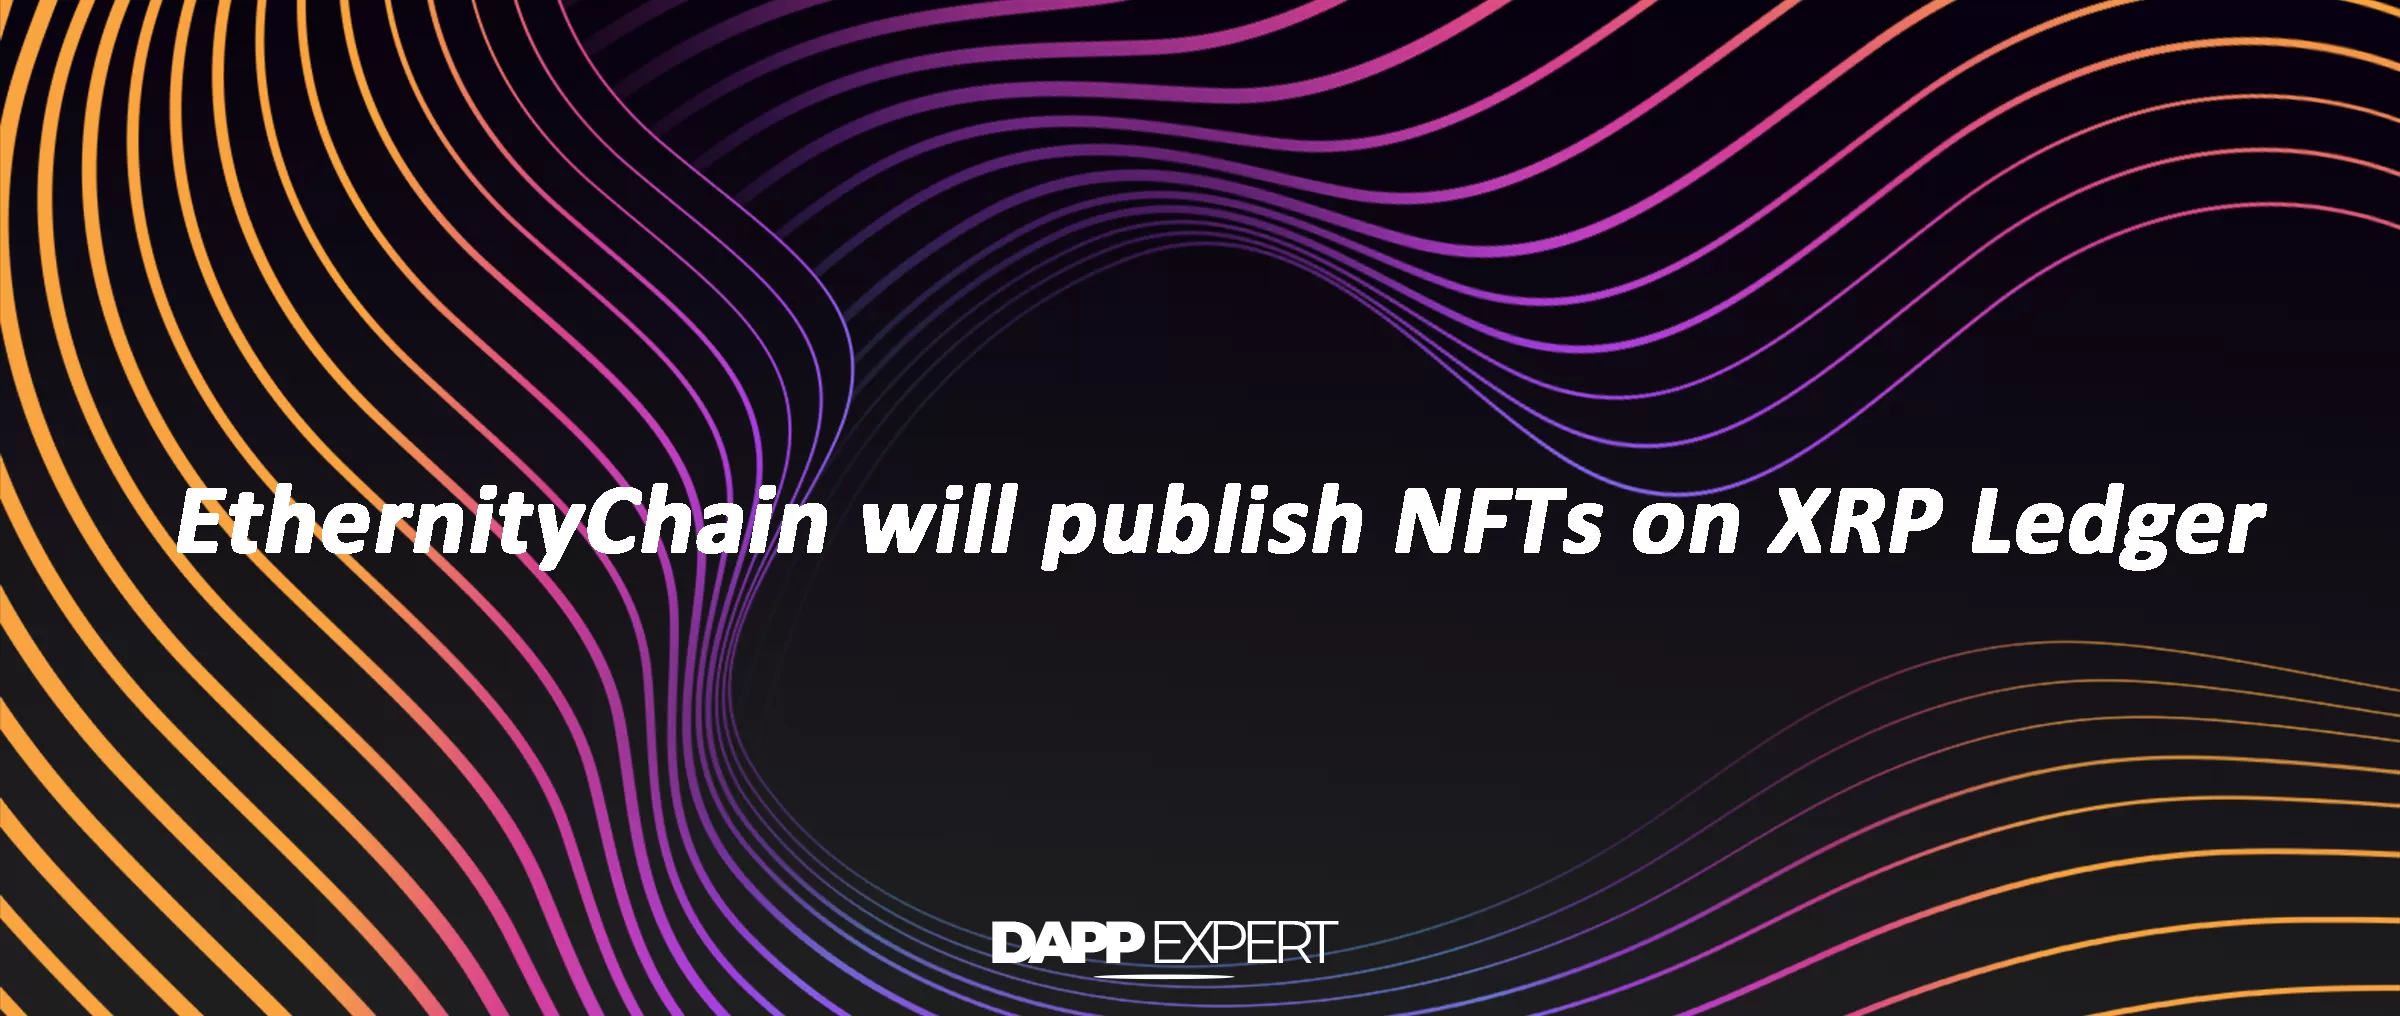 EthernityChain will publish NFTs on XRP Ledger